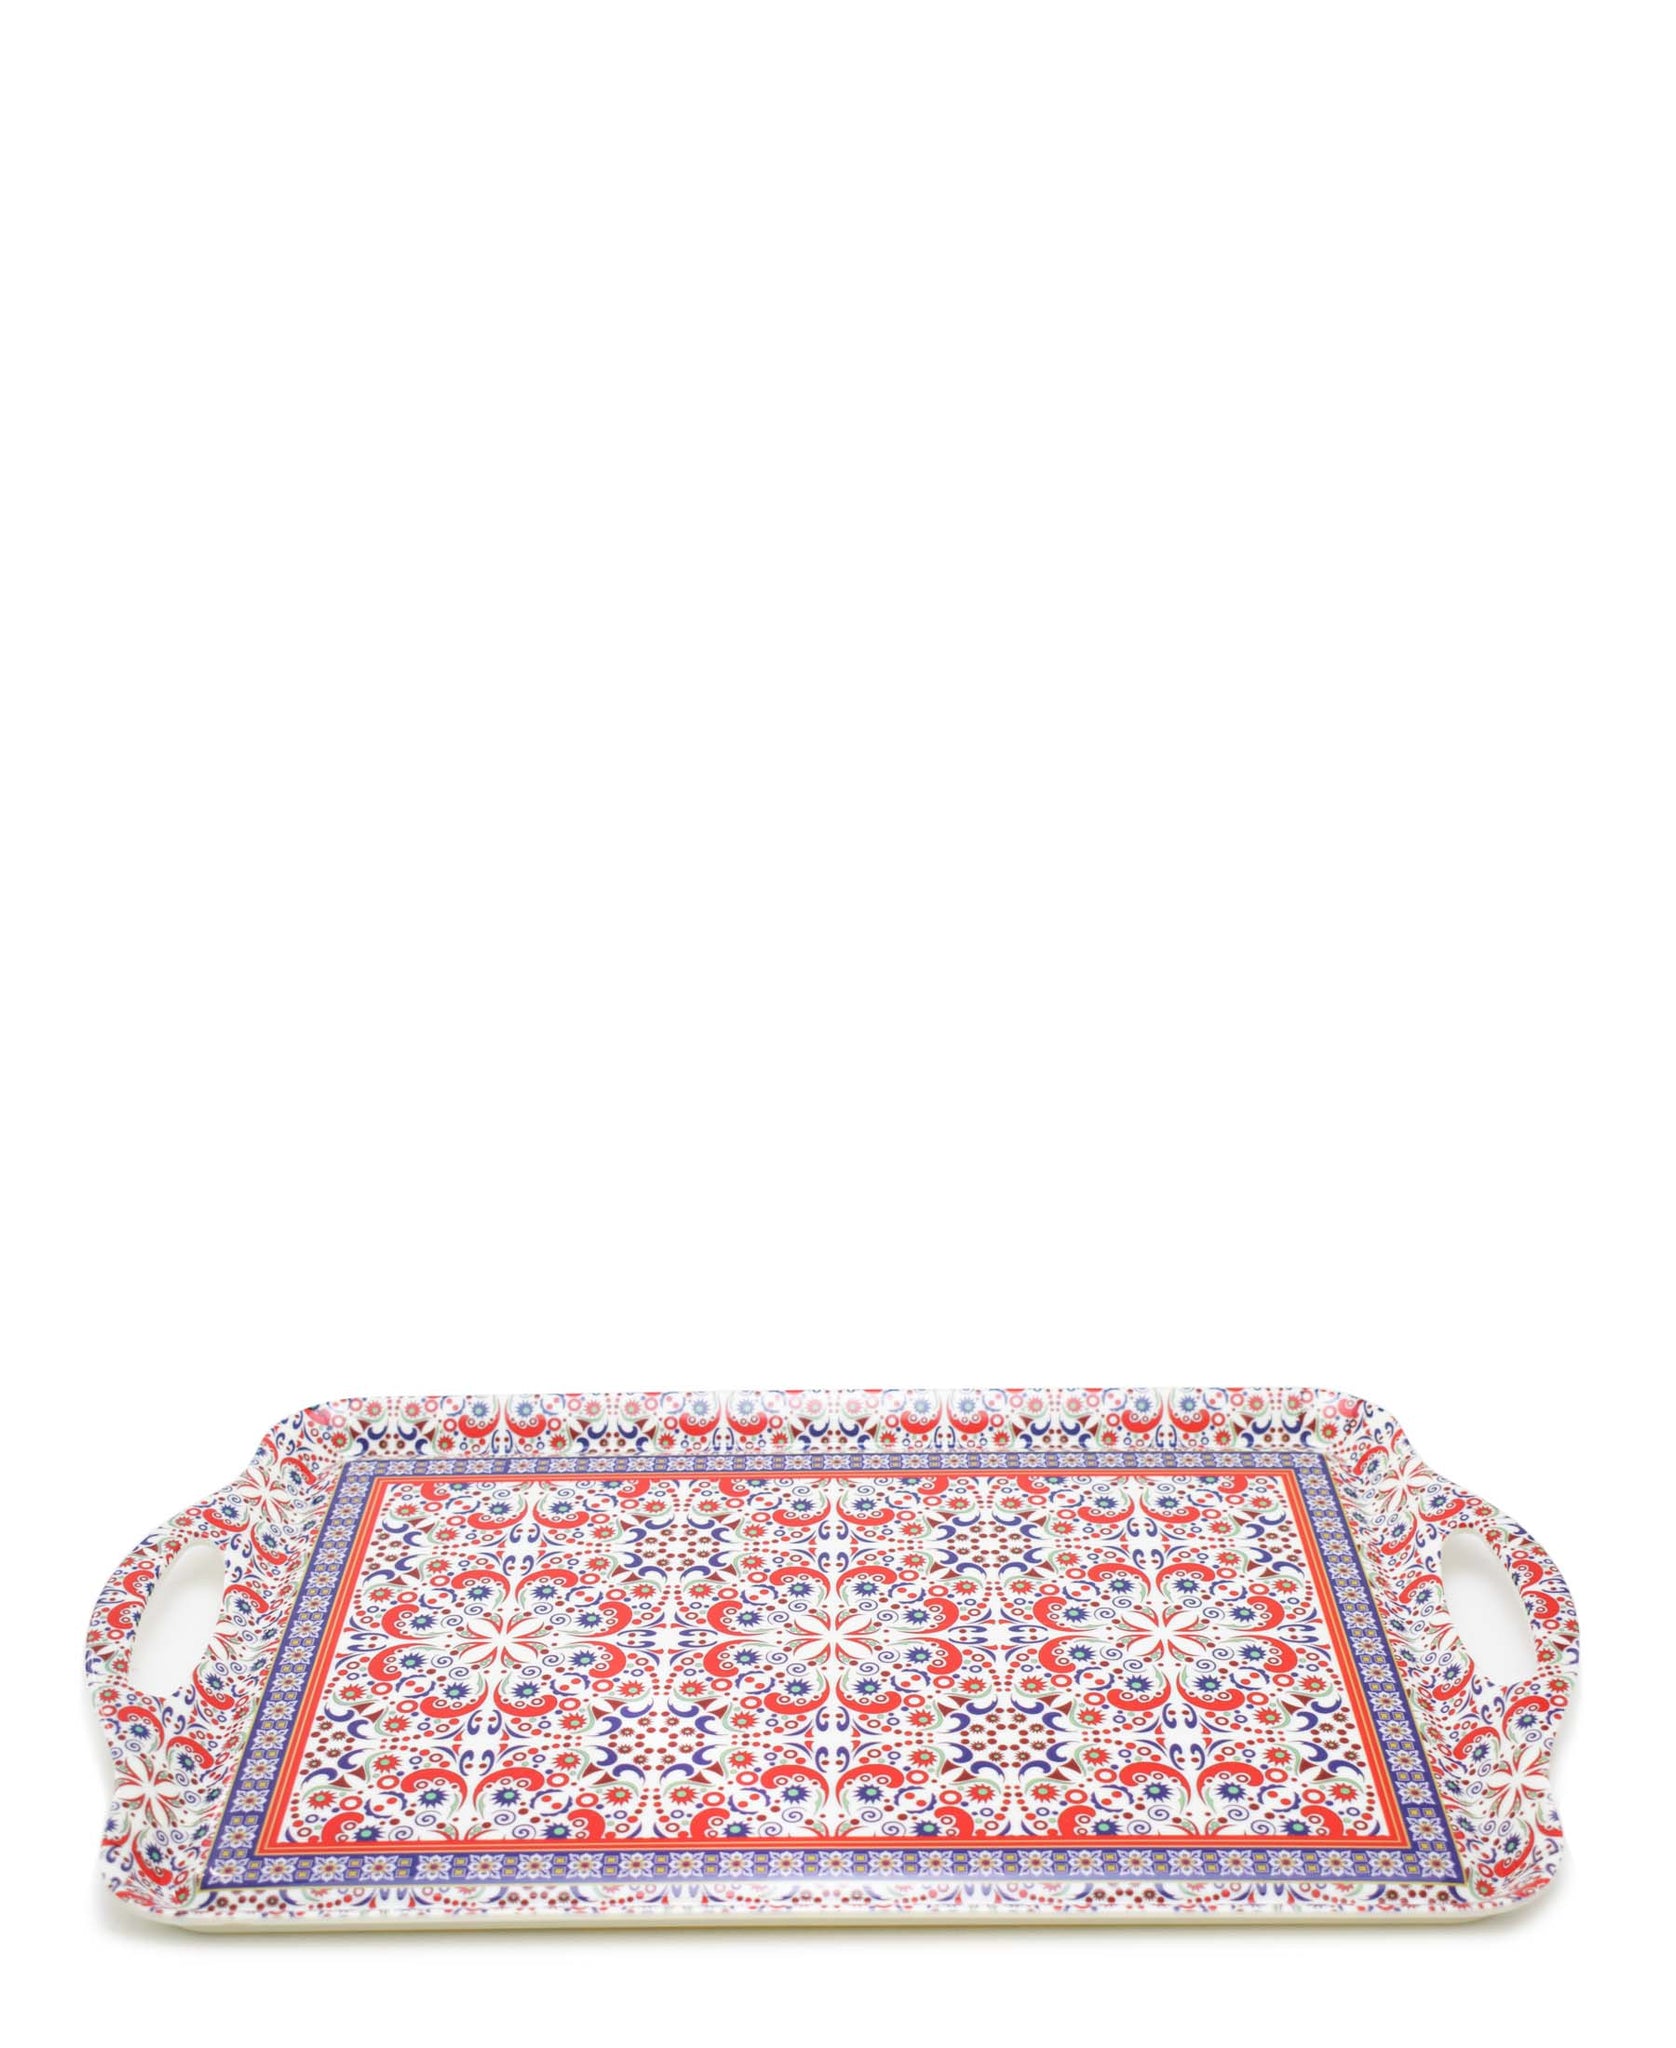 Kitchen Life Patterned Tray - Red